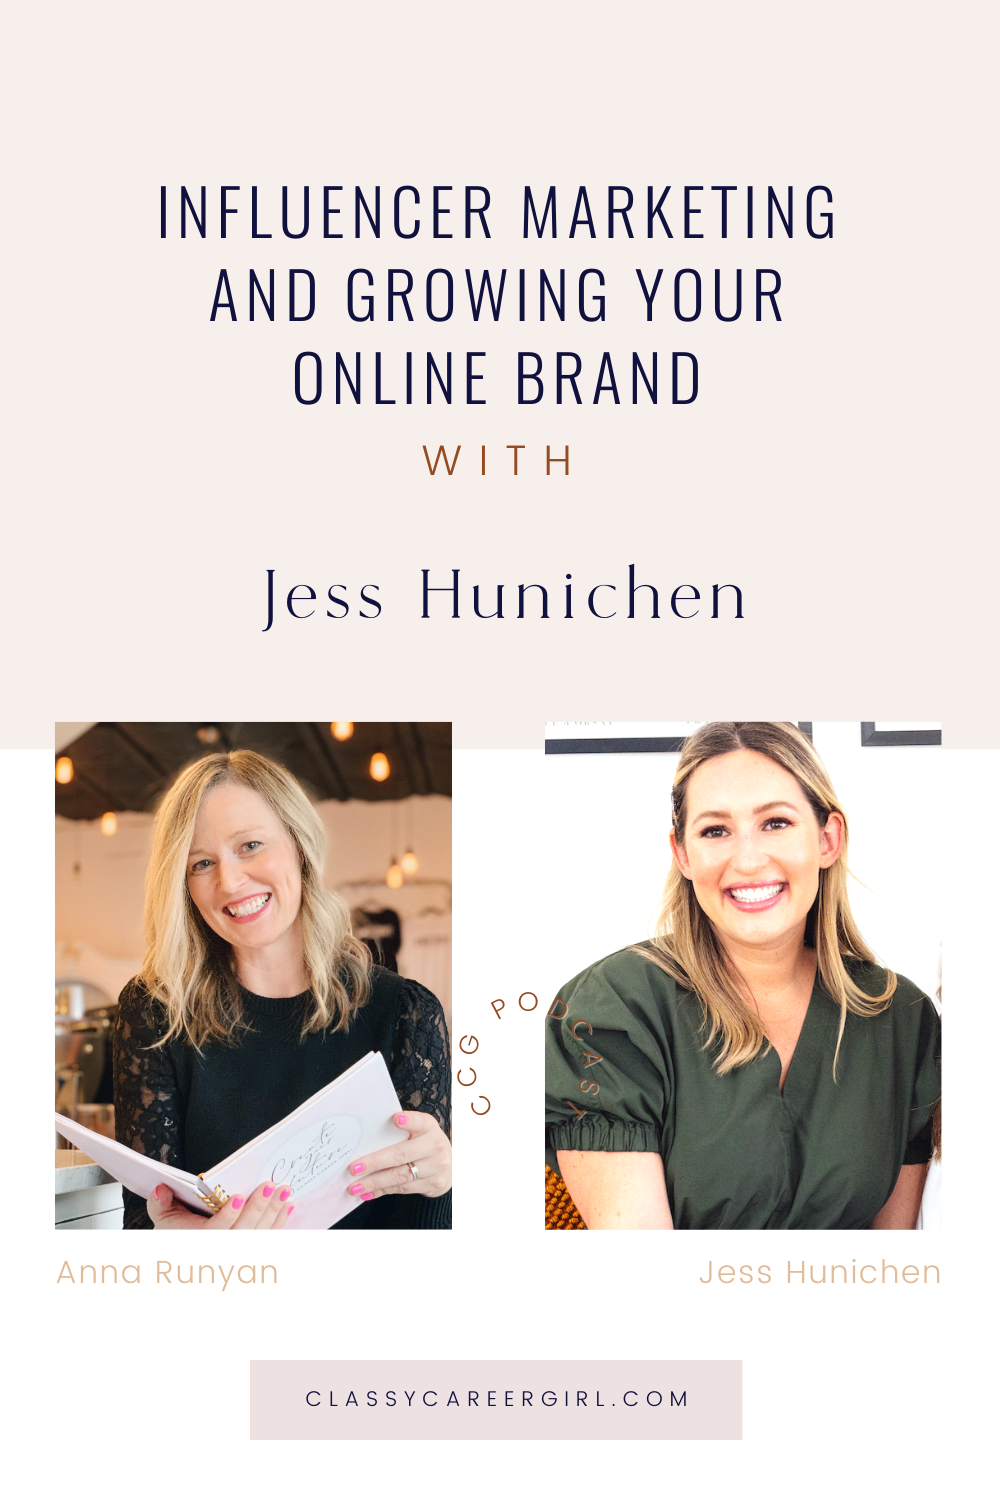 Anna sits down in with Jess Hunichen to learn more about influencer marketing and how to grow your brand.